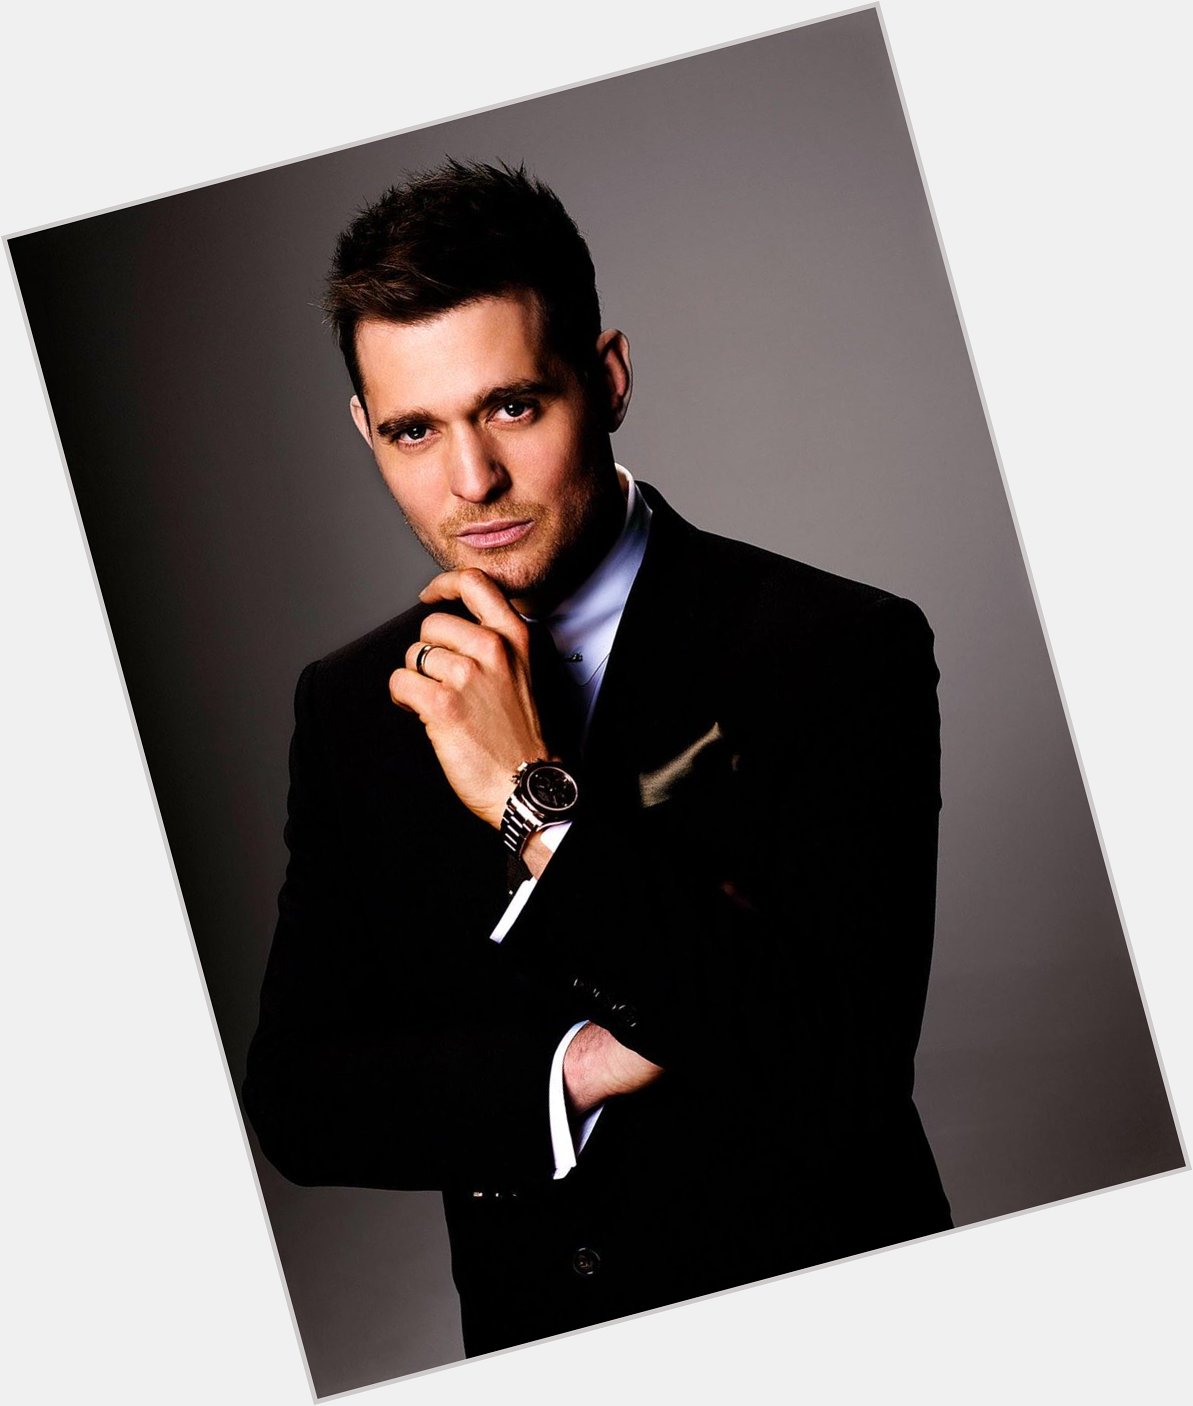 This cheeky chappy turns 40 today! Happy Birthday Michael Buble! 